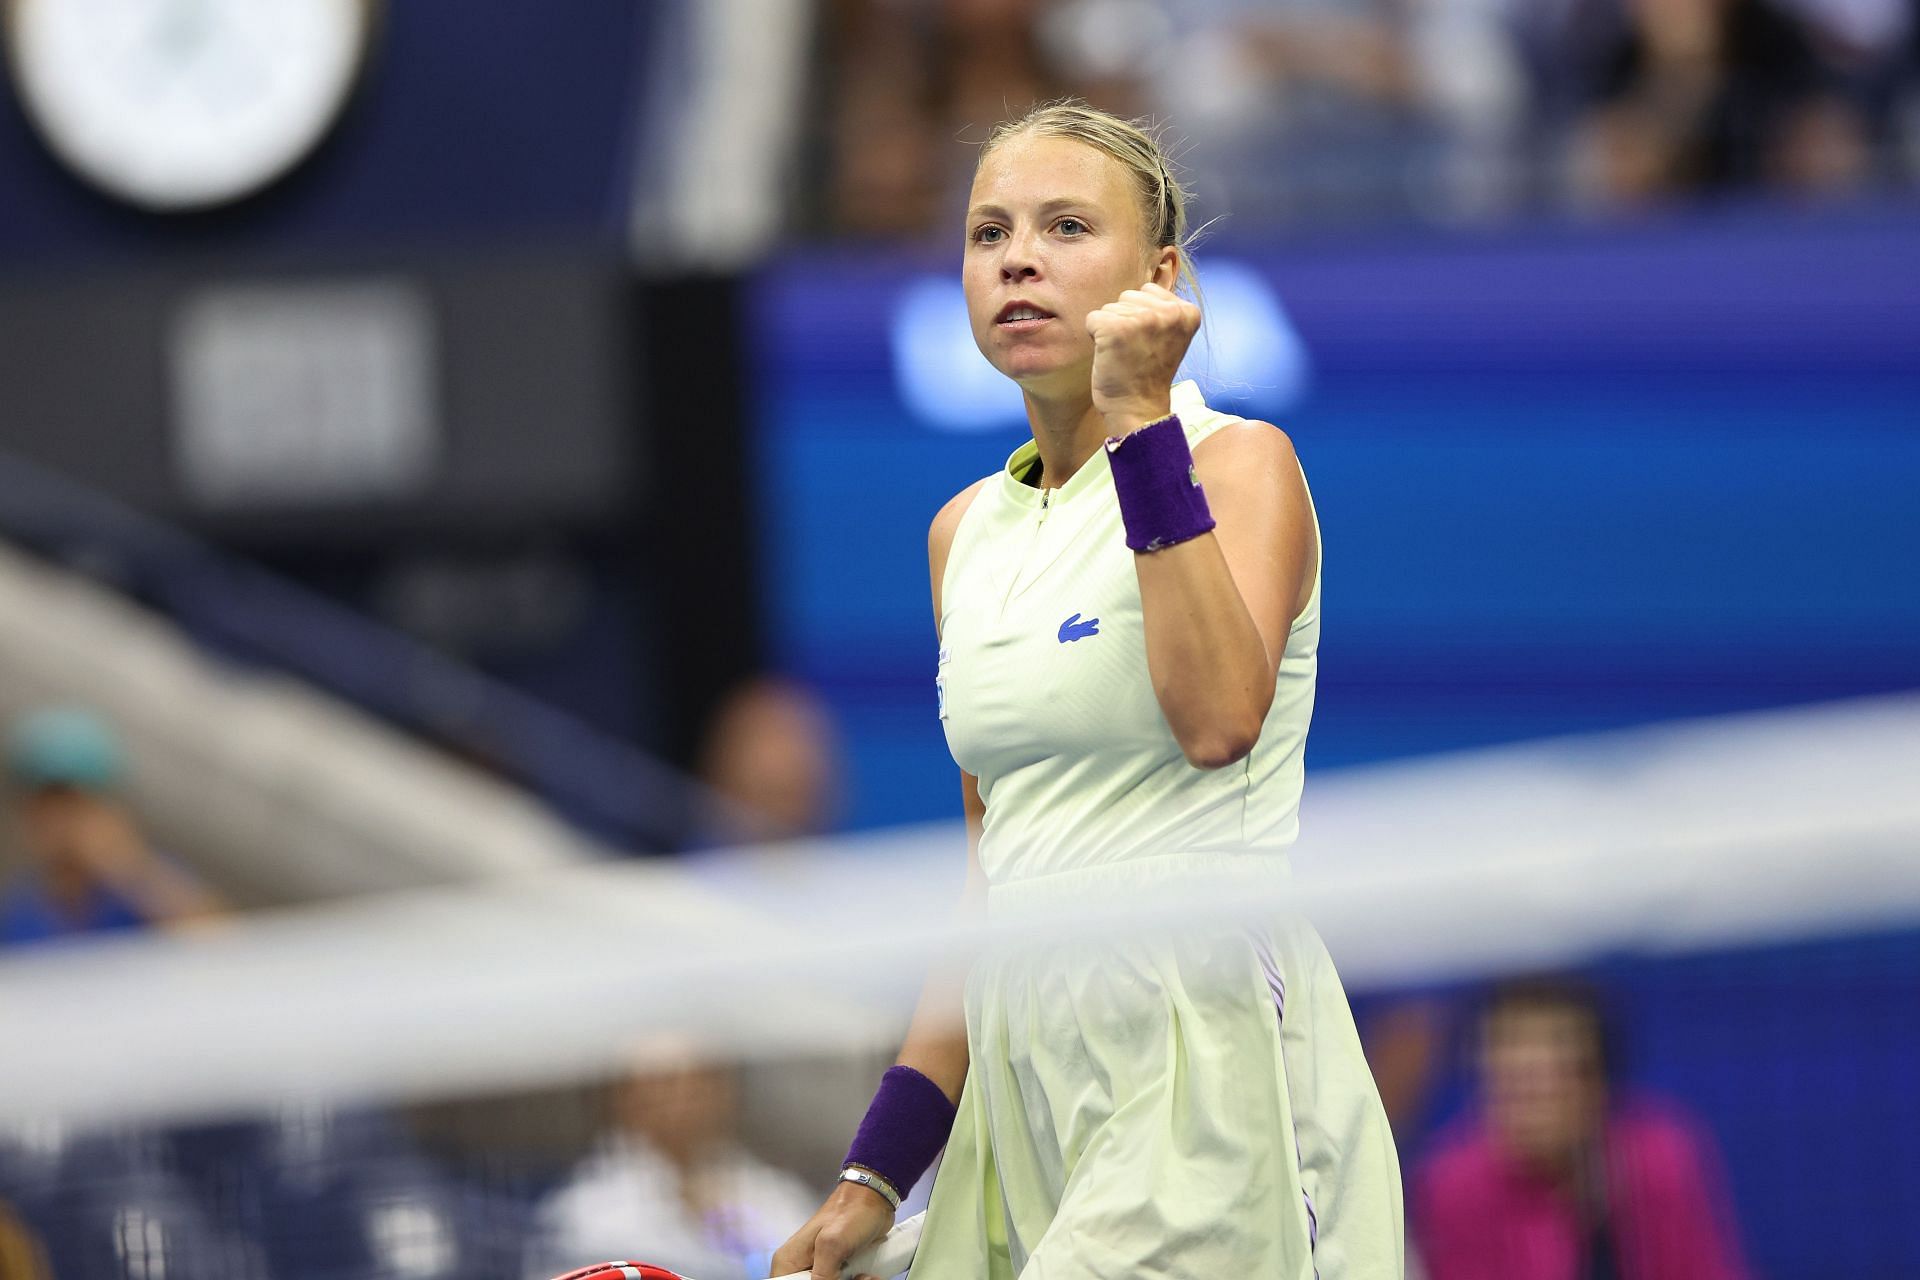 Anett Kontaveit at the 2022 US Open.